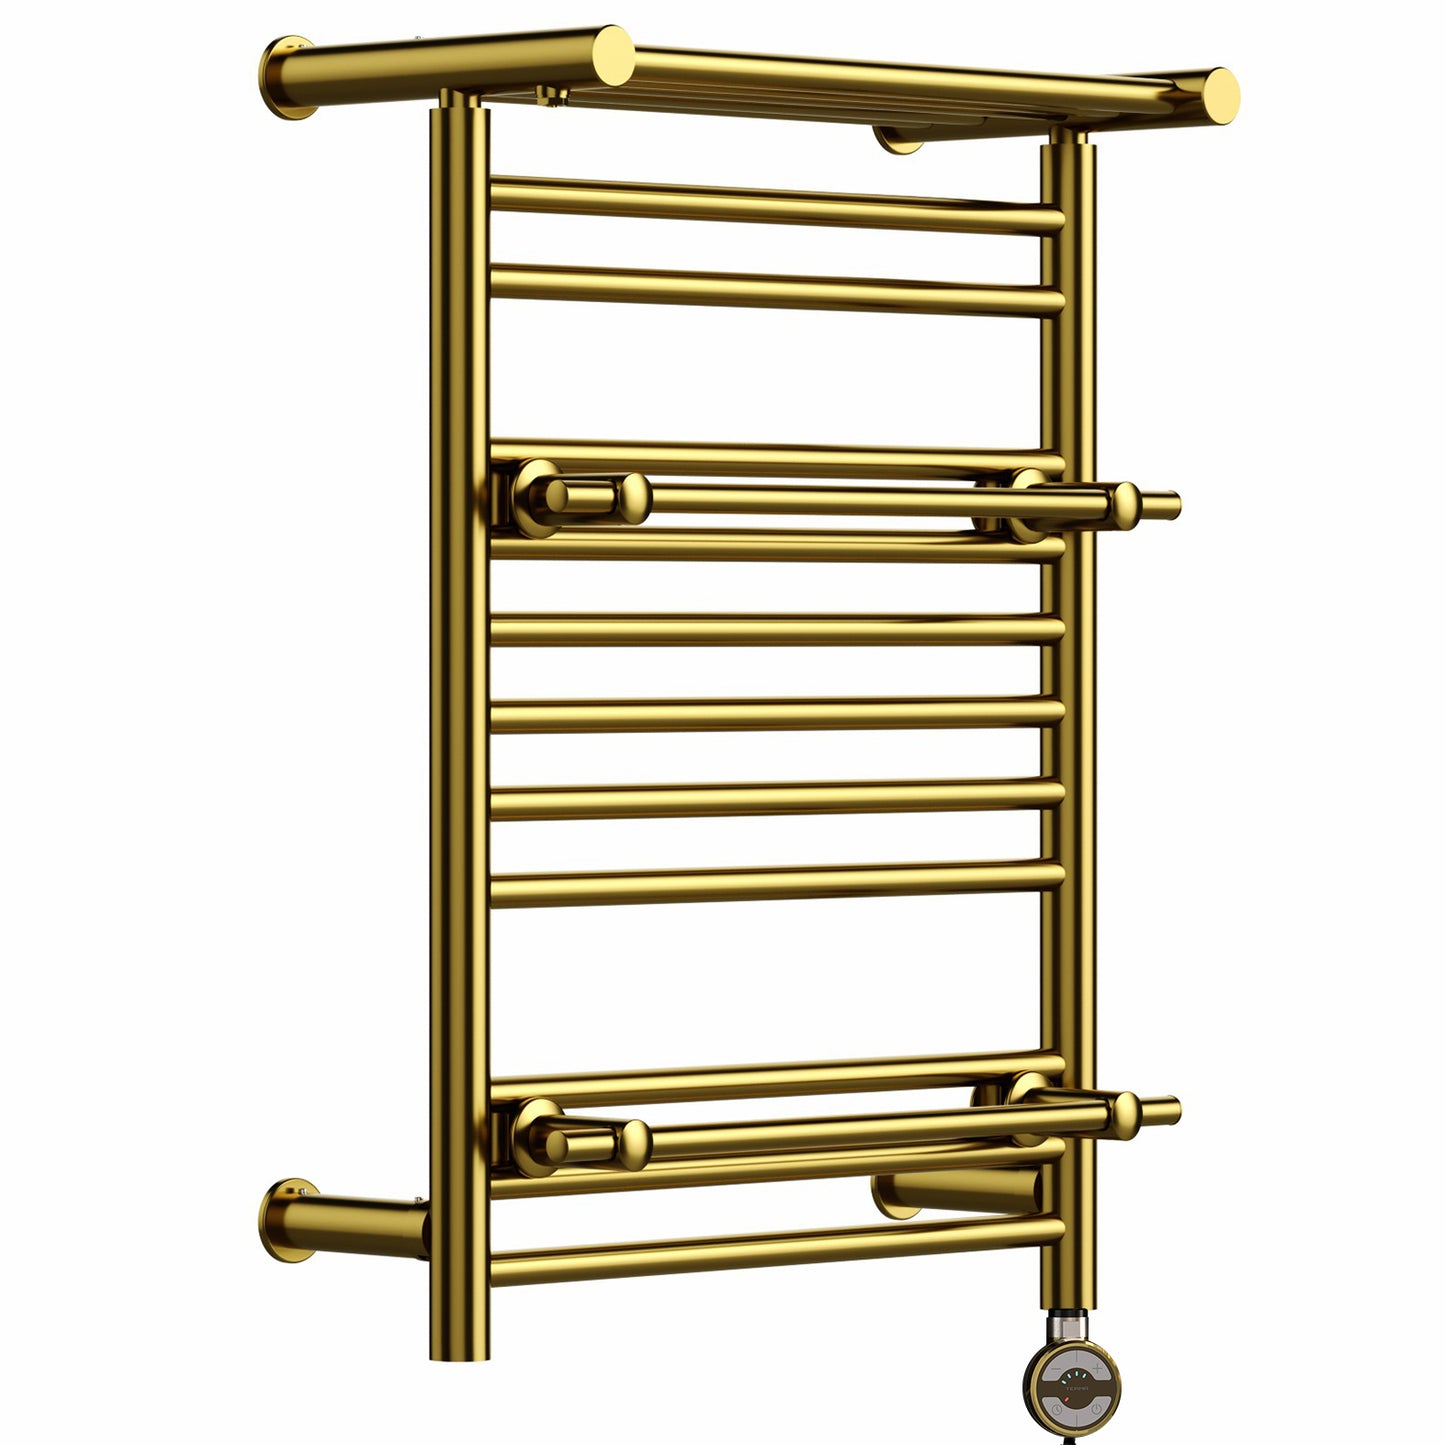 490mm Wide 680mm  High Gold Electric Towel Rail Radiator Top Shelf & Two Towel Holder OSLO For Bathroom & Kitchen